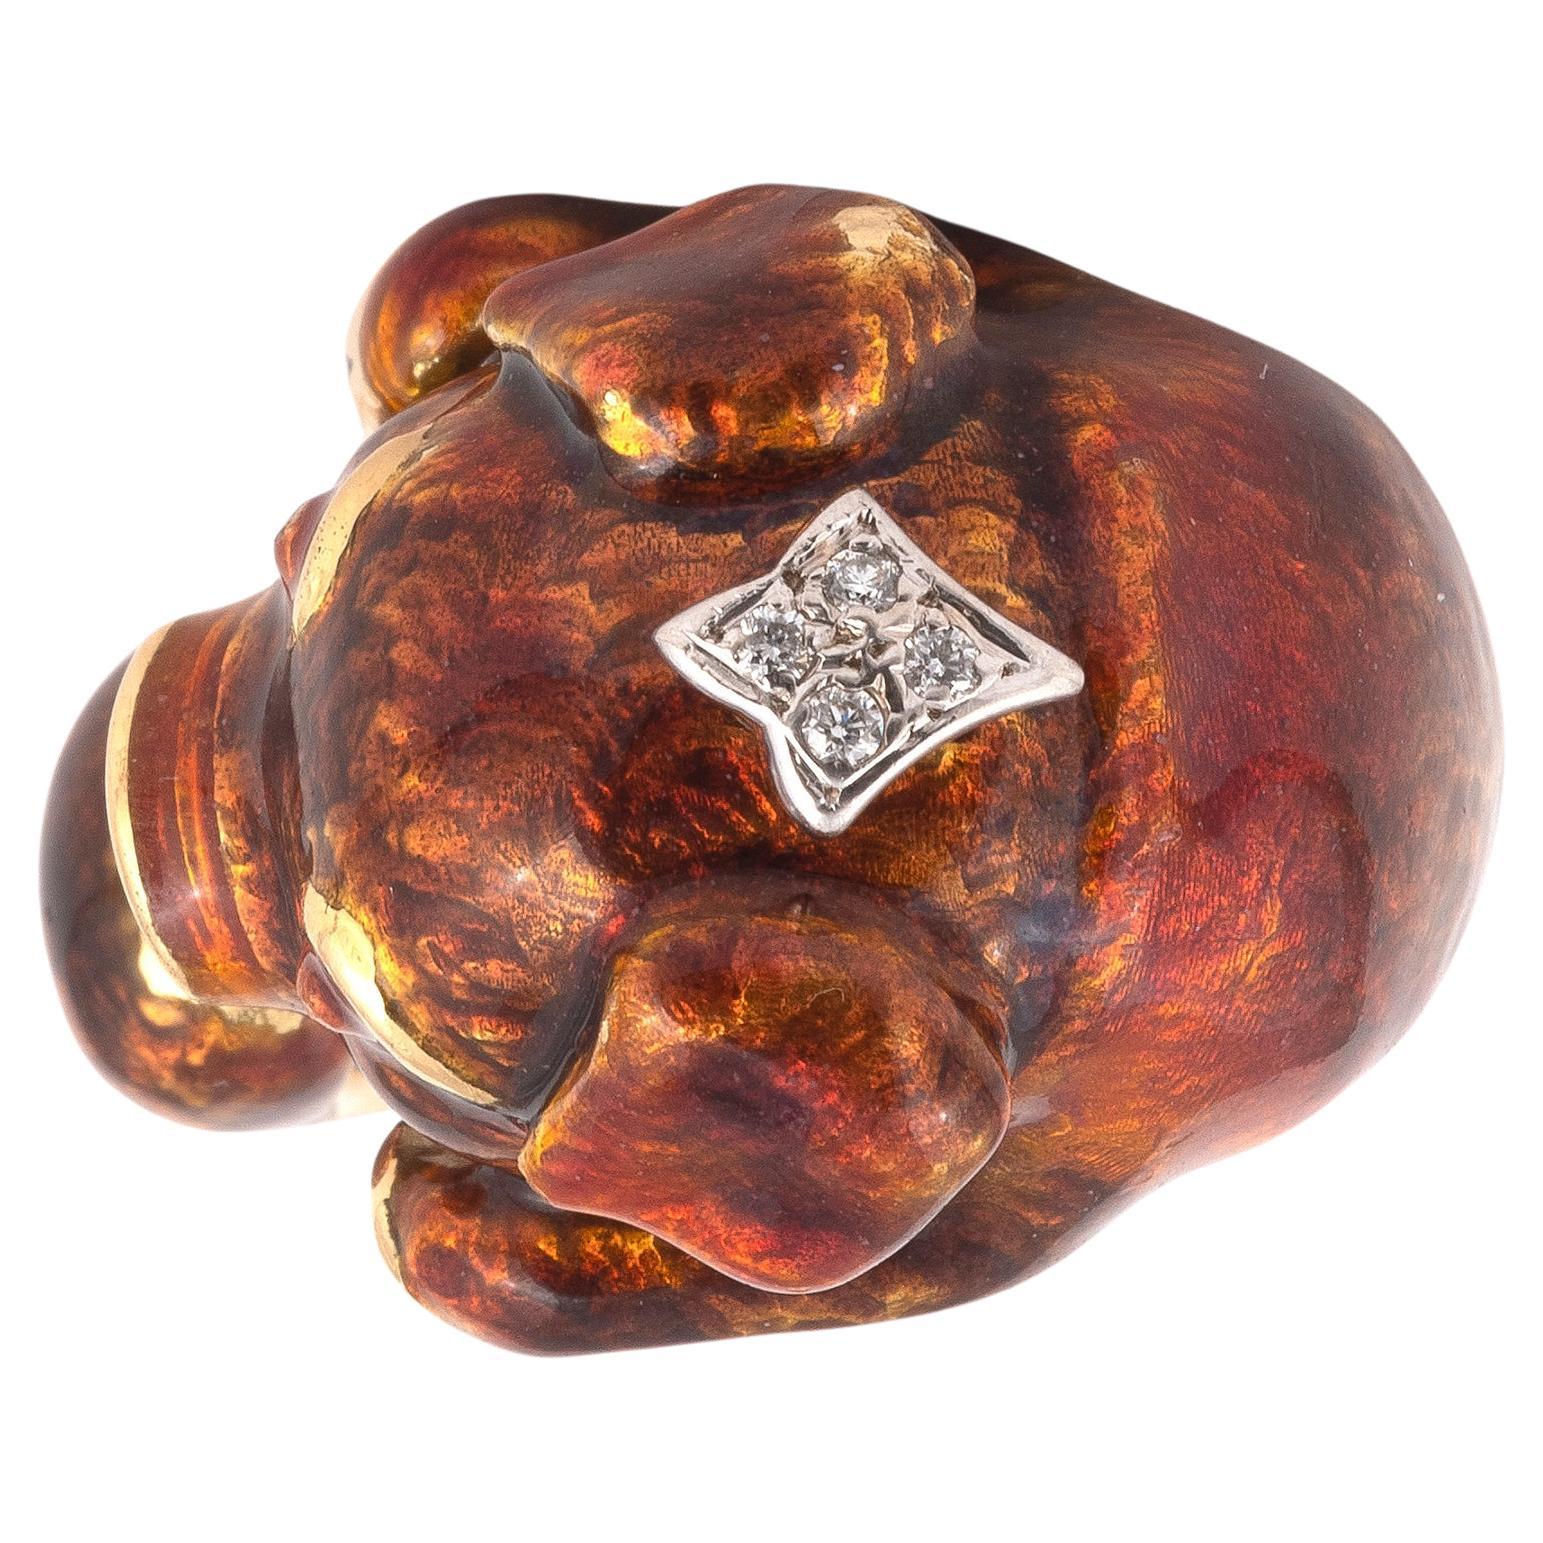 Lovely ring to start your David Webb collection with or to continue on building your David Webb animal zoo.
Size : 7
Weight: 27.4gr.

